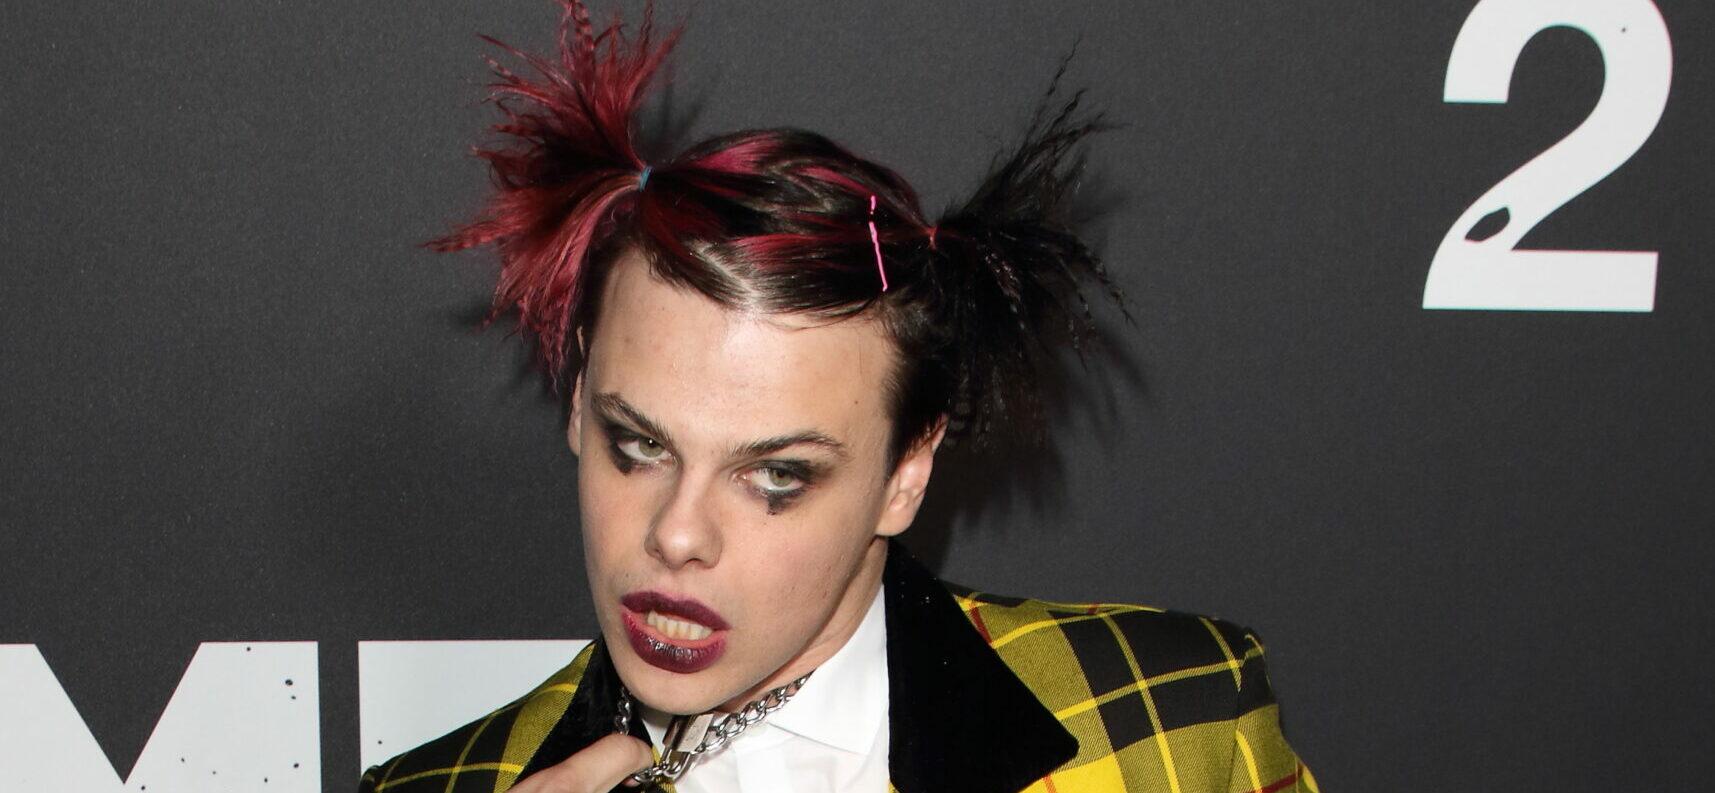 London, UK. Yungblud at NME Awards 2020 held at the O2 Brixton Academy, London on February 12th 2020